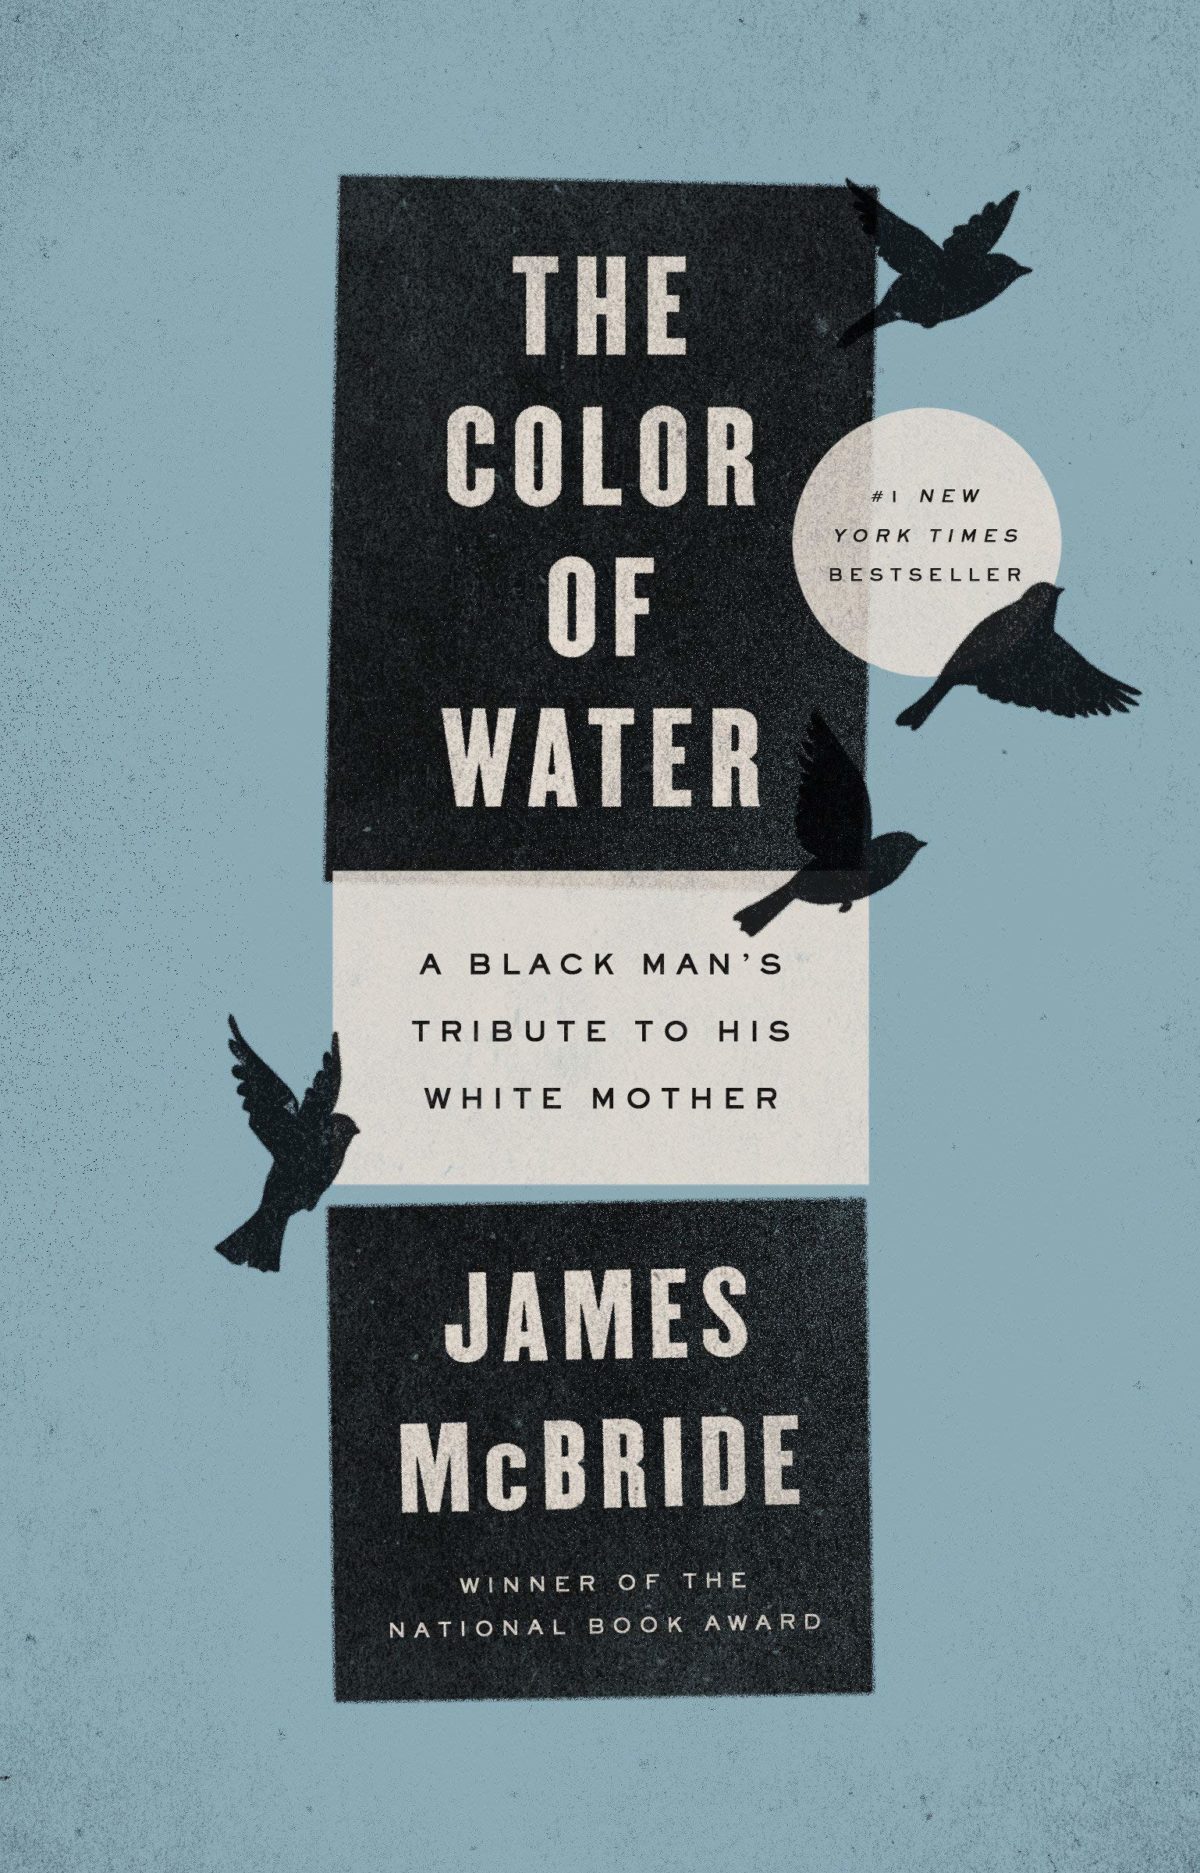 the color of water racism essay